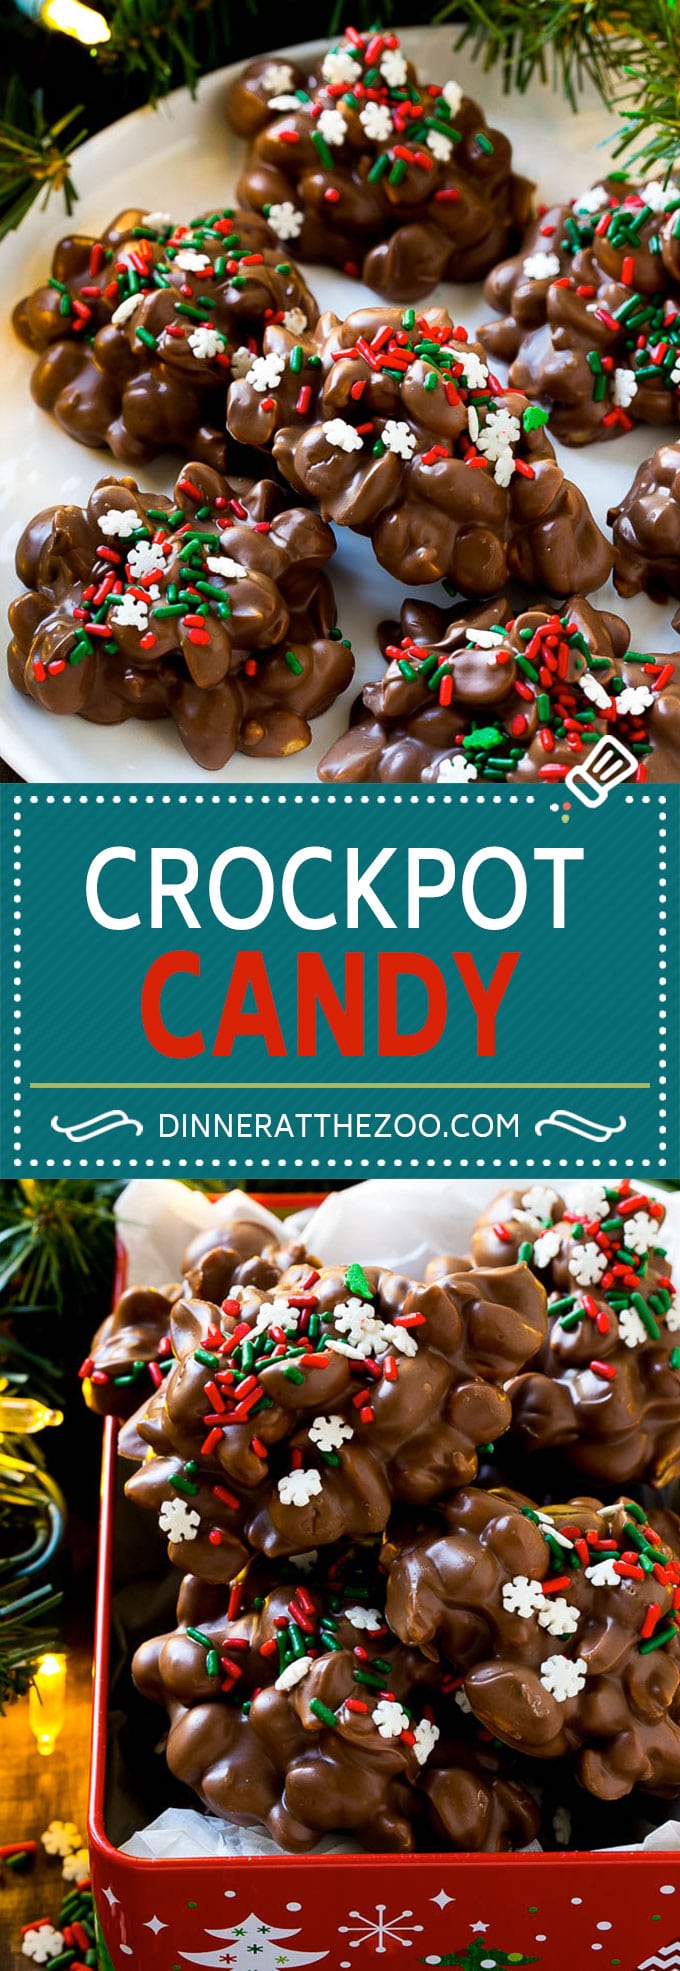 Crockpot Candy | Slow Cooker Candy | Crockpot Peanut Clusters | Chocolate Peanut Clusters